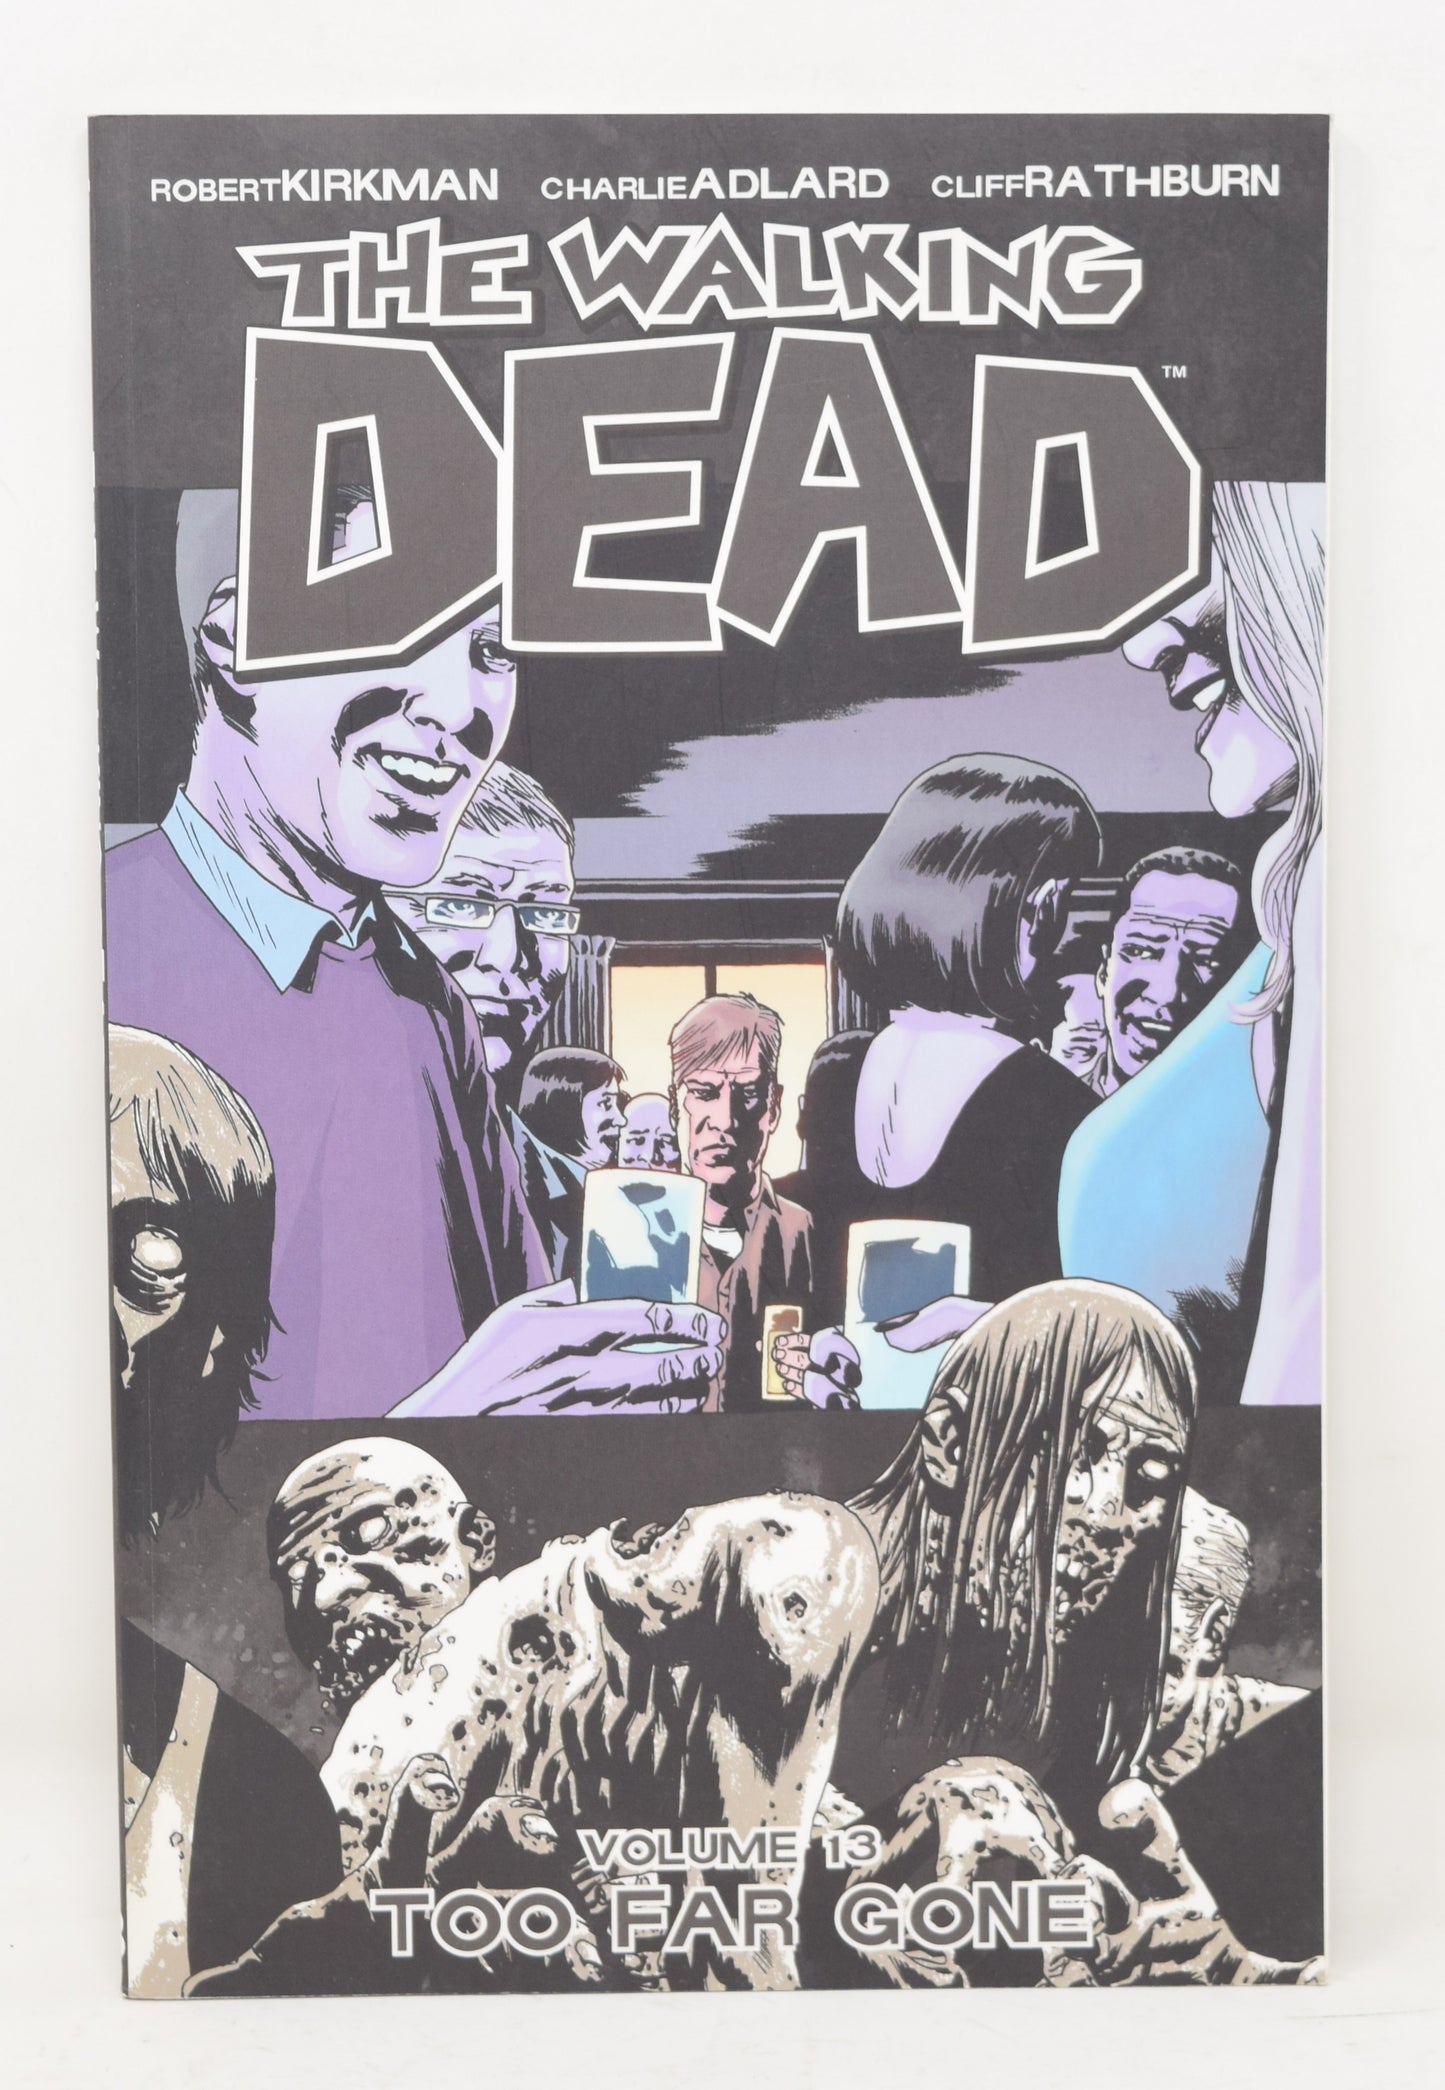 The Walking Dead Vol 13 Too far Gone 2nd Print Image 2010 GN NM New